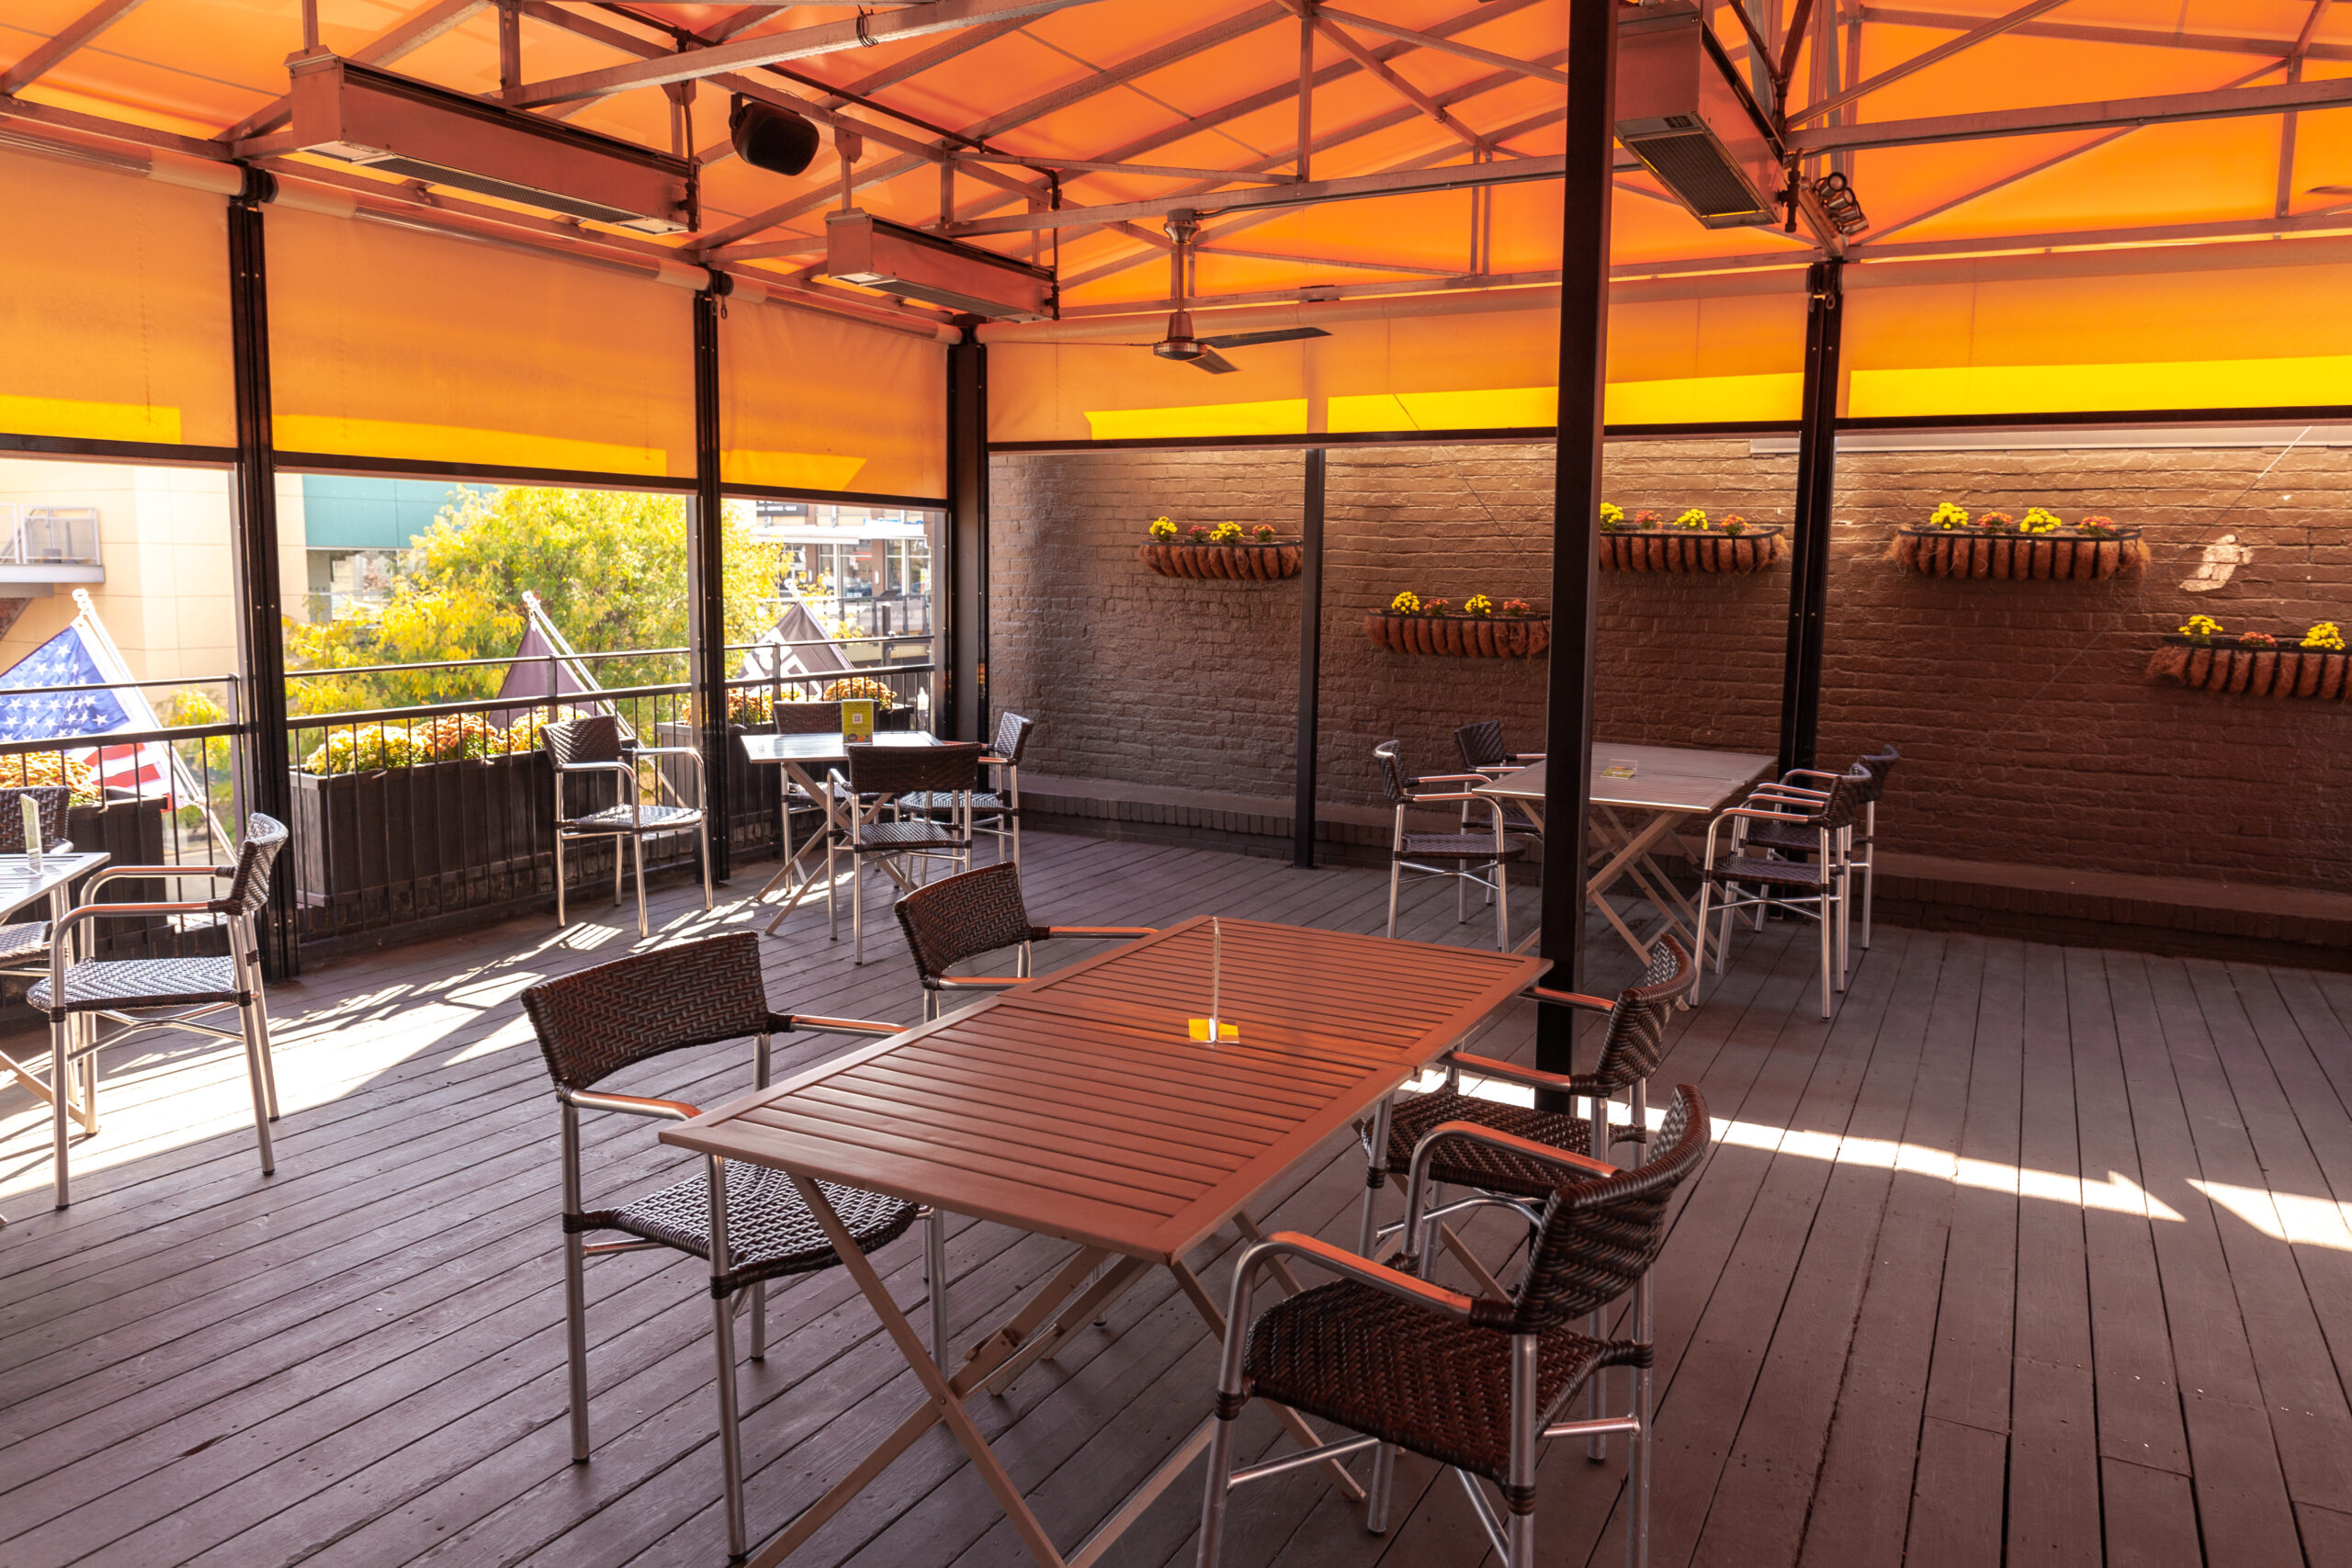 A photo of the outdoor dining area at Square Cafe. There is an orange awning and warm colored flowers for a cozy outdoor vibe.